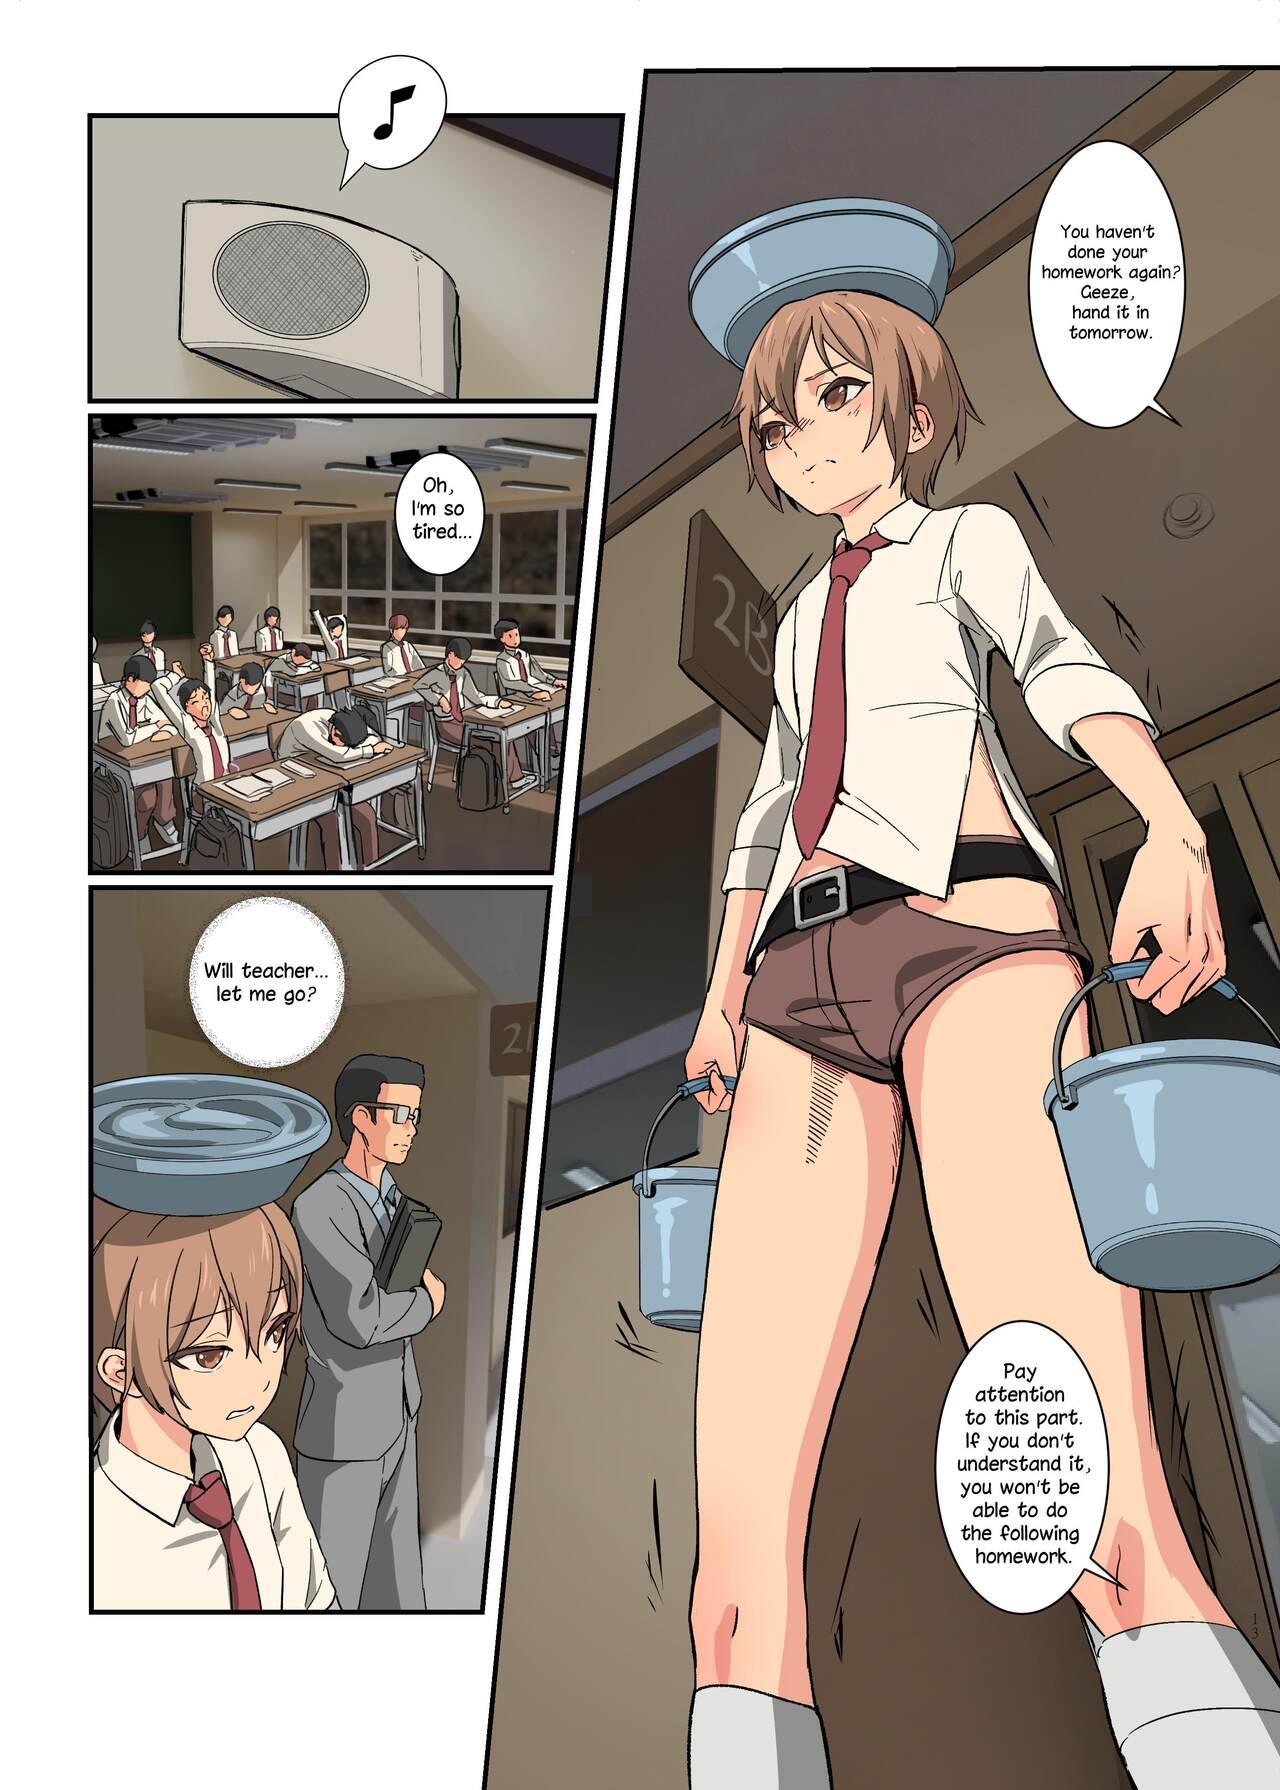 Shared Class Toy: The Daily Physical Punishments of Suzuji 12